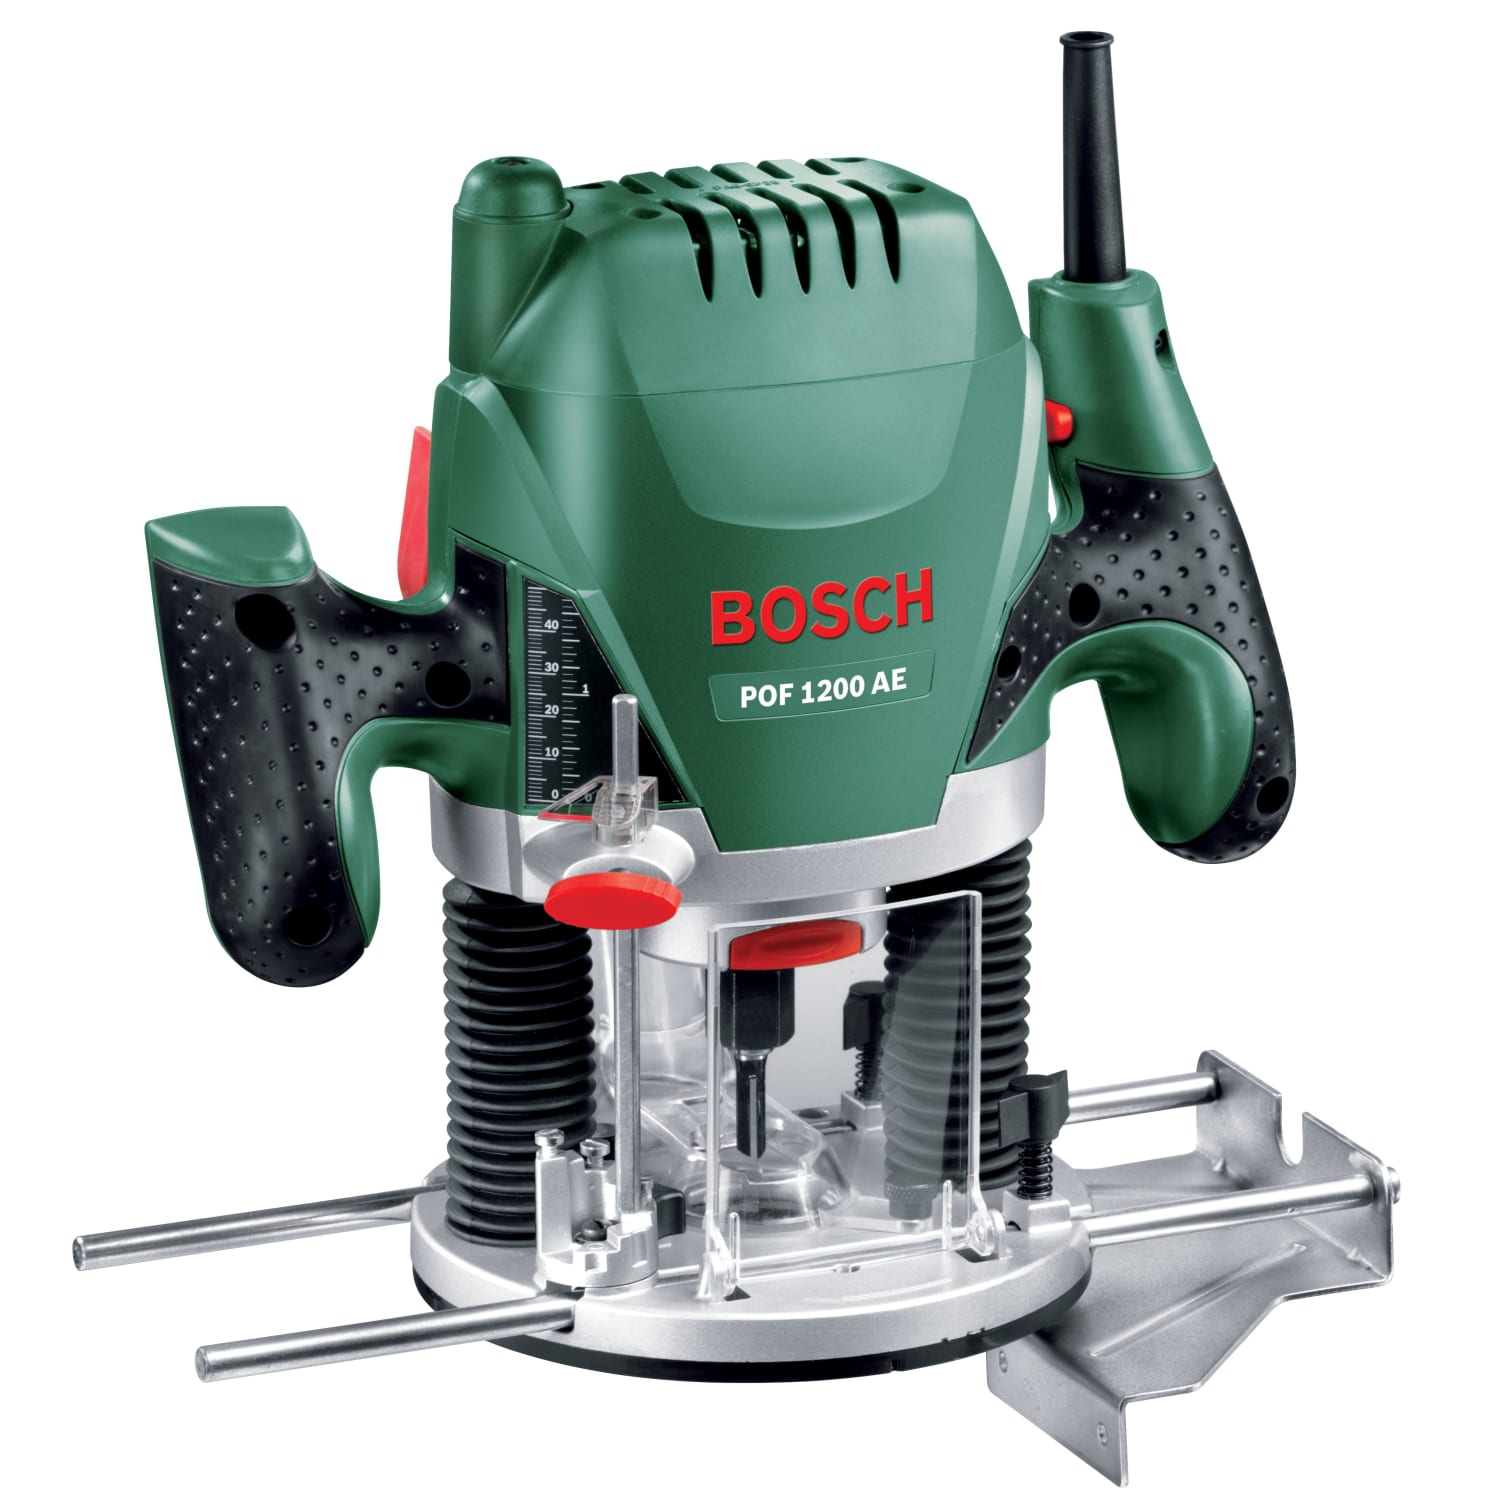 lettelse Knurre bruge Bosch POF 1200 AE 1/4in Corded Plunge Router - 1200W | Wickes.co.uk